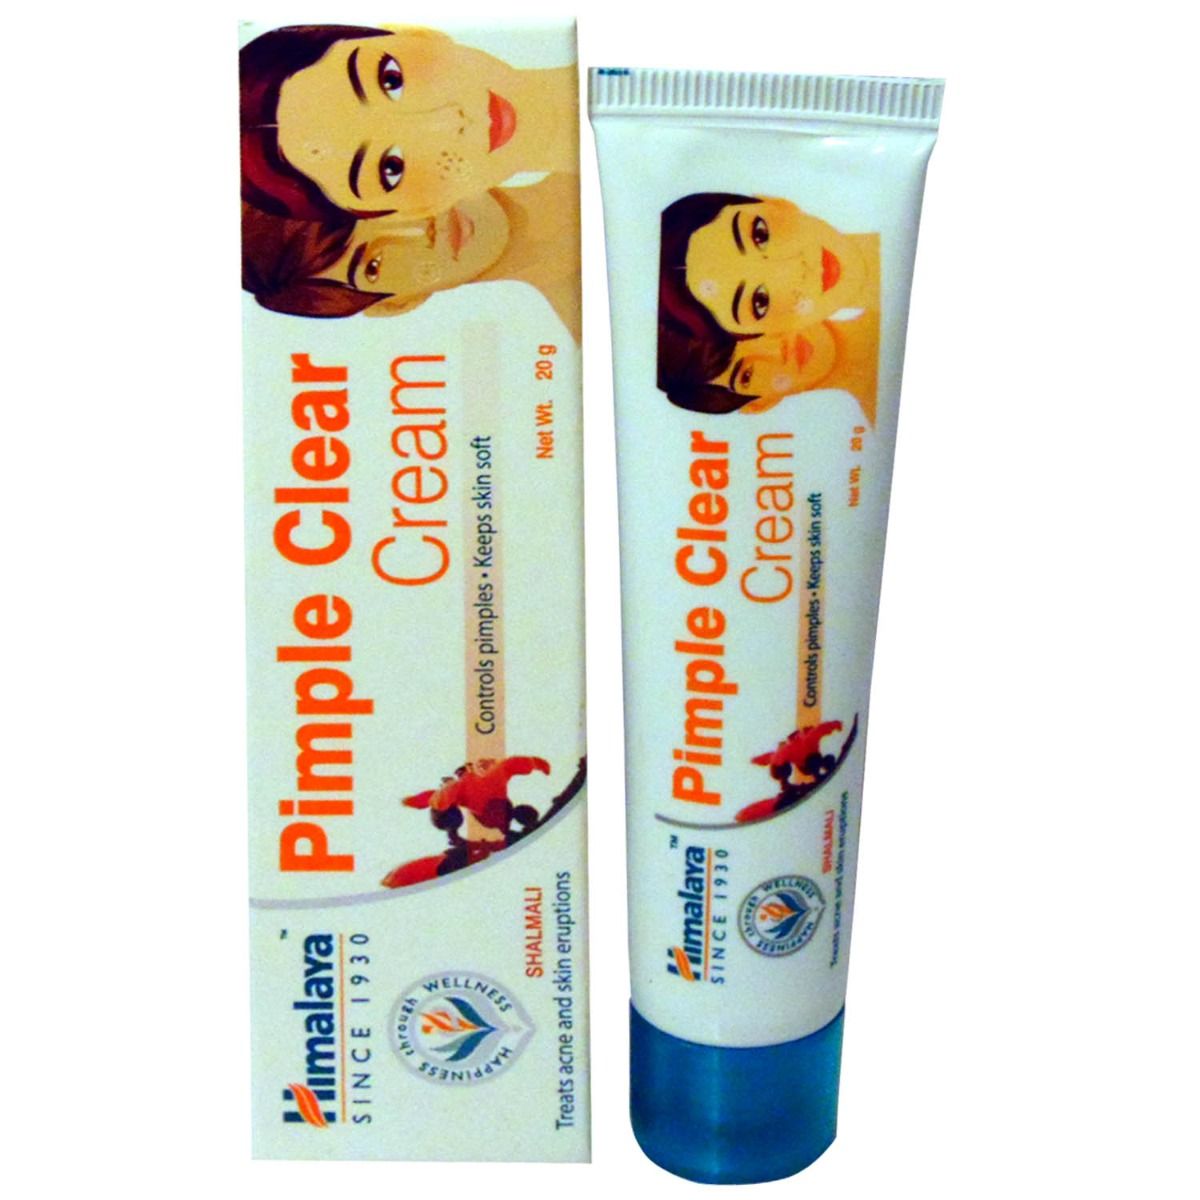 Himalaya Pimple Clear Cream, 20 gm, Pack of 1 